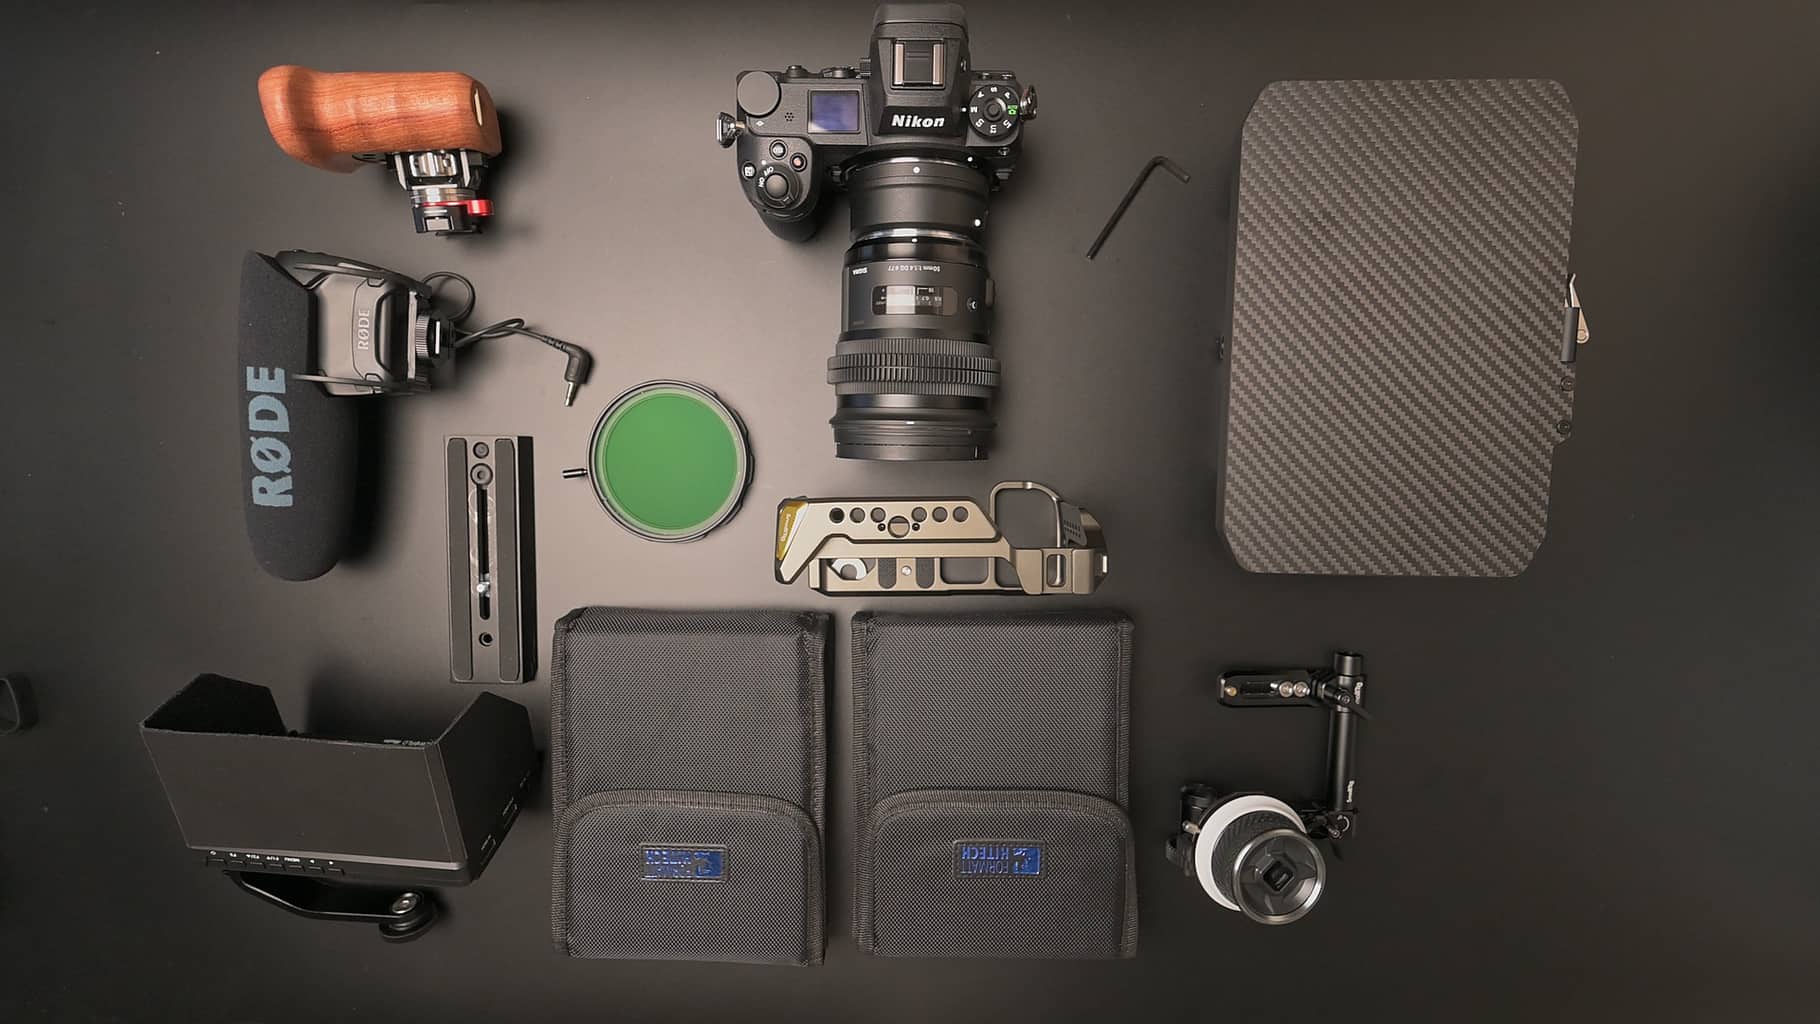 Nikon Z6ii camera rig components and how to build it